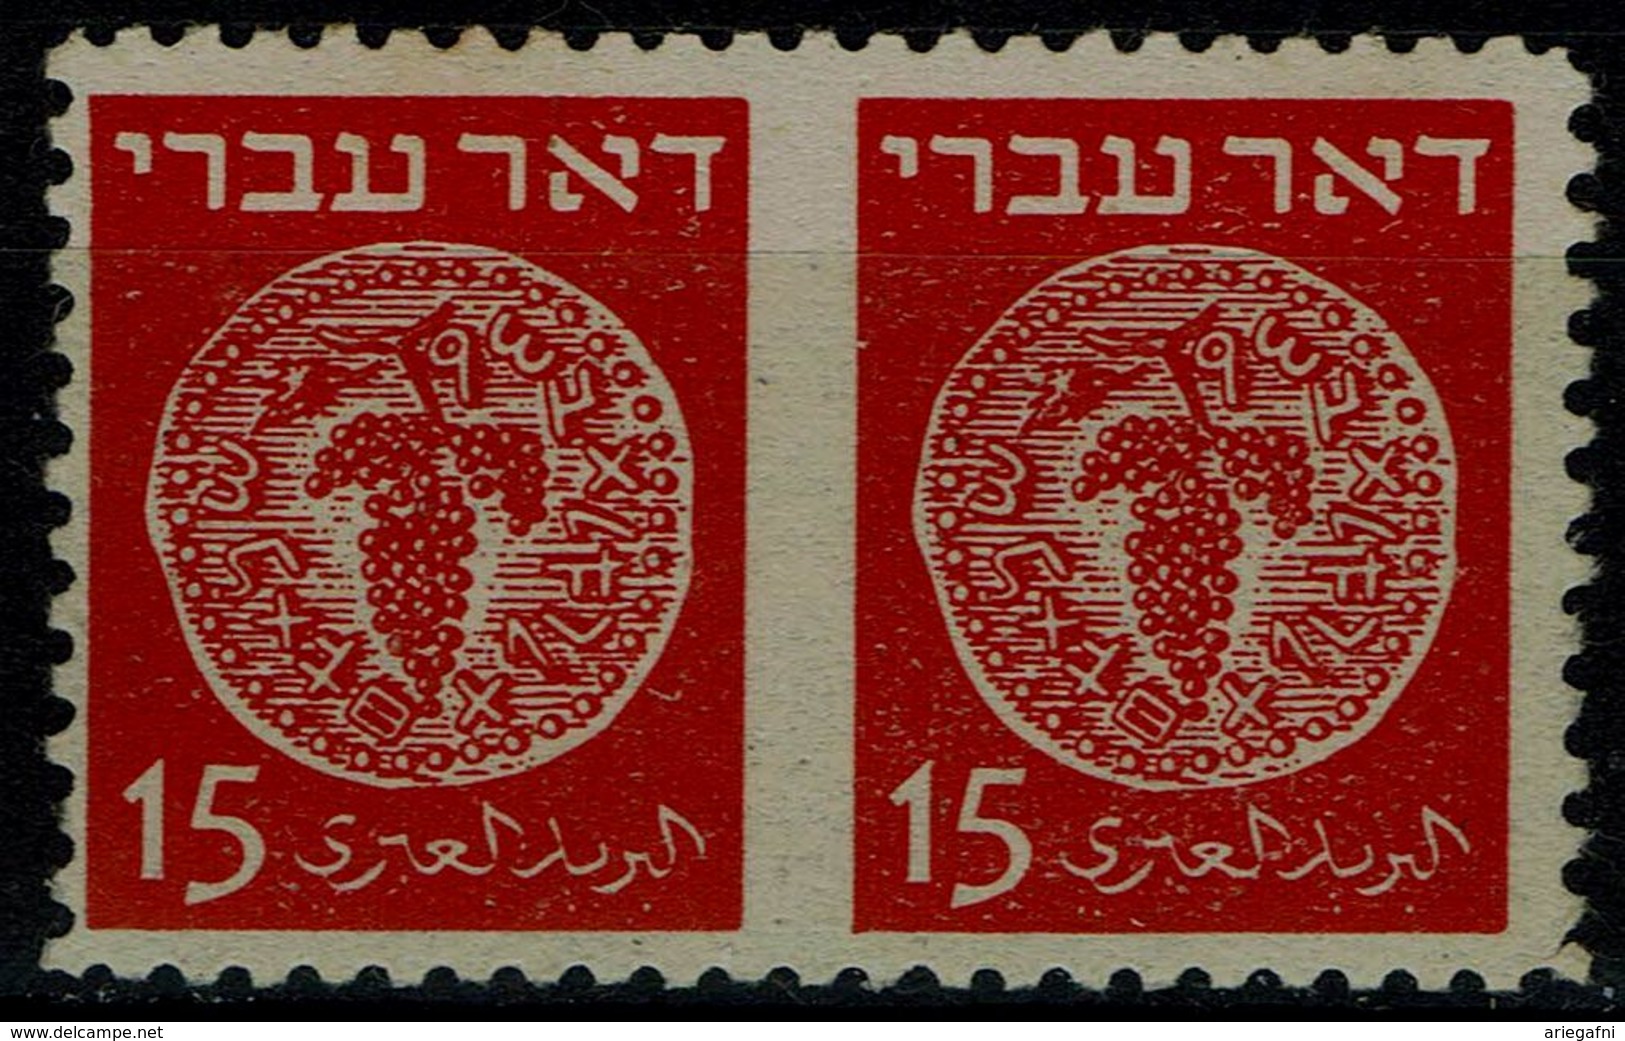 ISRAEL  1948 DOAR IVRI ERRORS 15mil HORIZONTAL PAIR IMPERFORATED BETWEEN MNH VF!! - Imperforates, Proofs & Errors